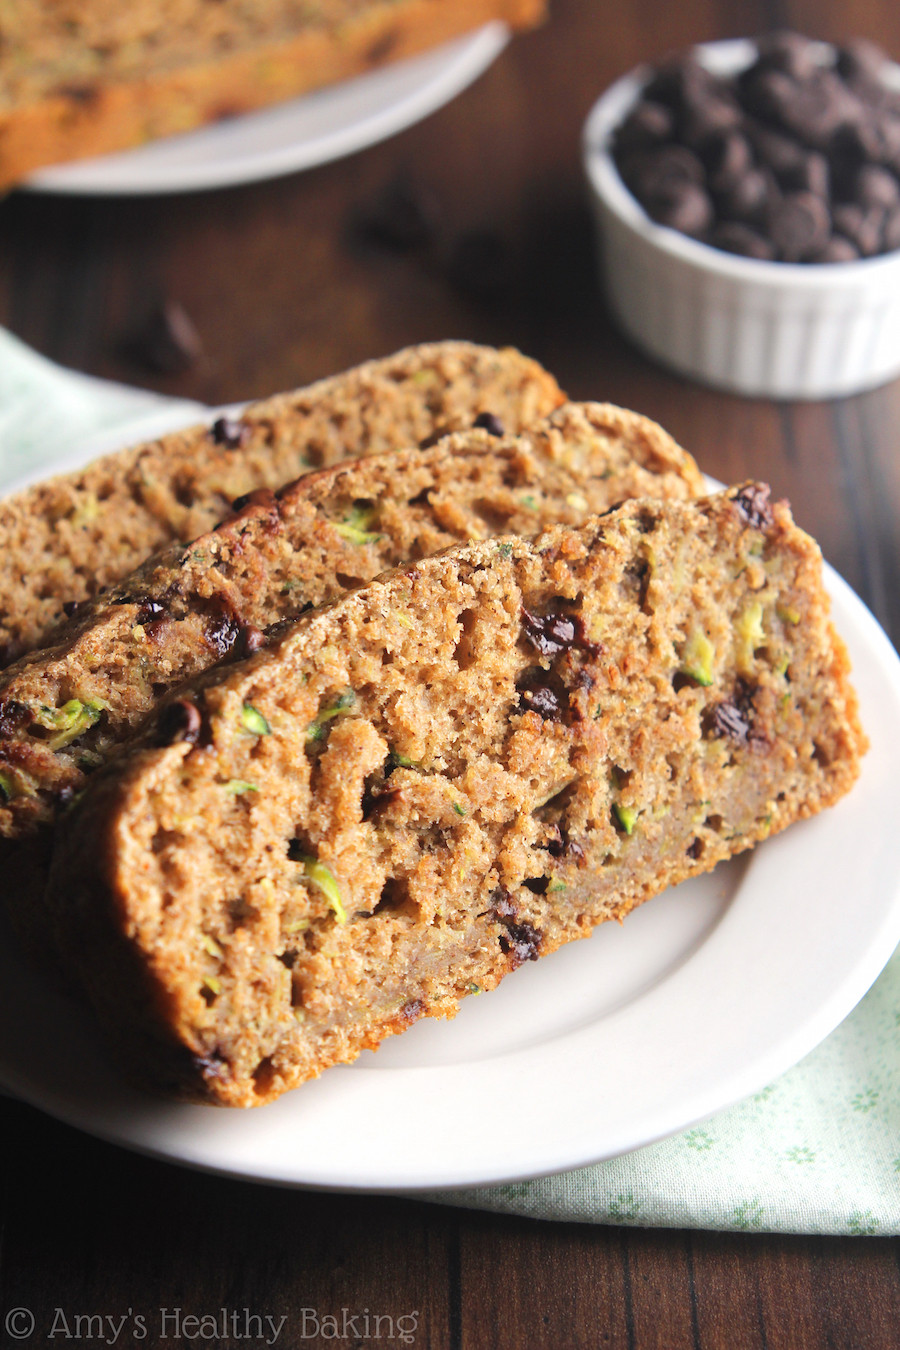 Zucchini Bread With Chocolate Chips
 Whole Wheat Chocolate Chip Zucchini Bread